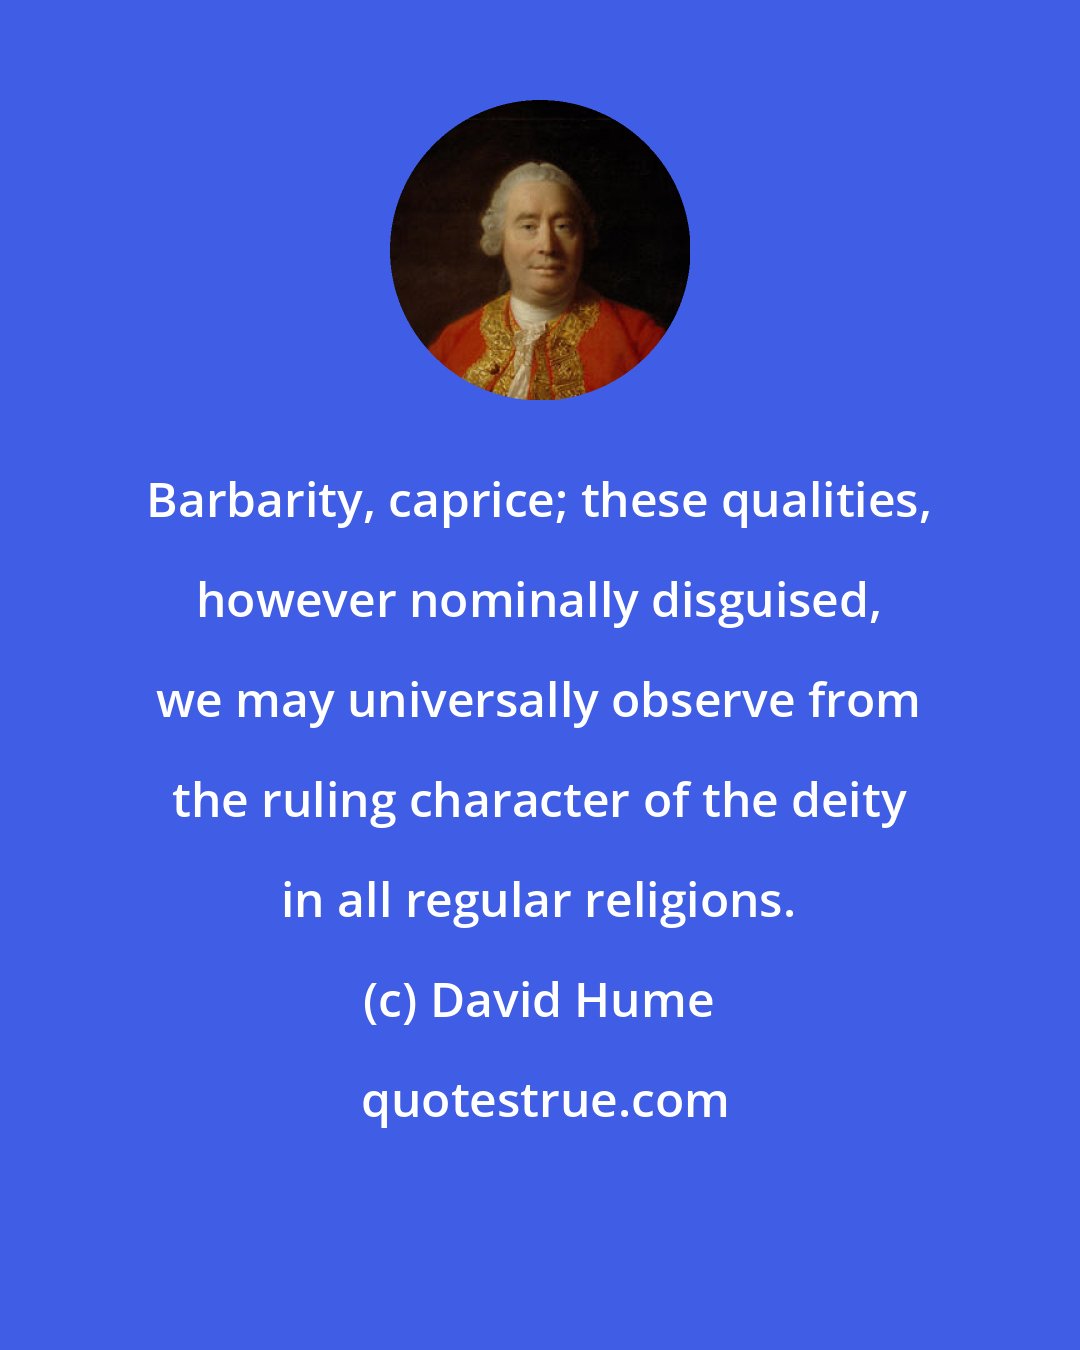 David Hume: Barbarity, caprice; these qualities, however nominally disguised, we may universally observe from the ruling character of the deity in all regular religions.